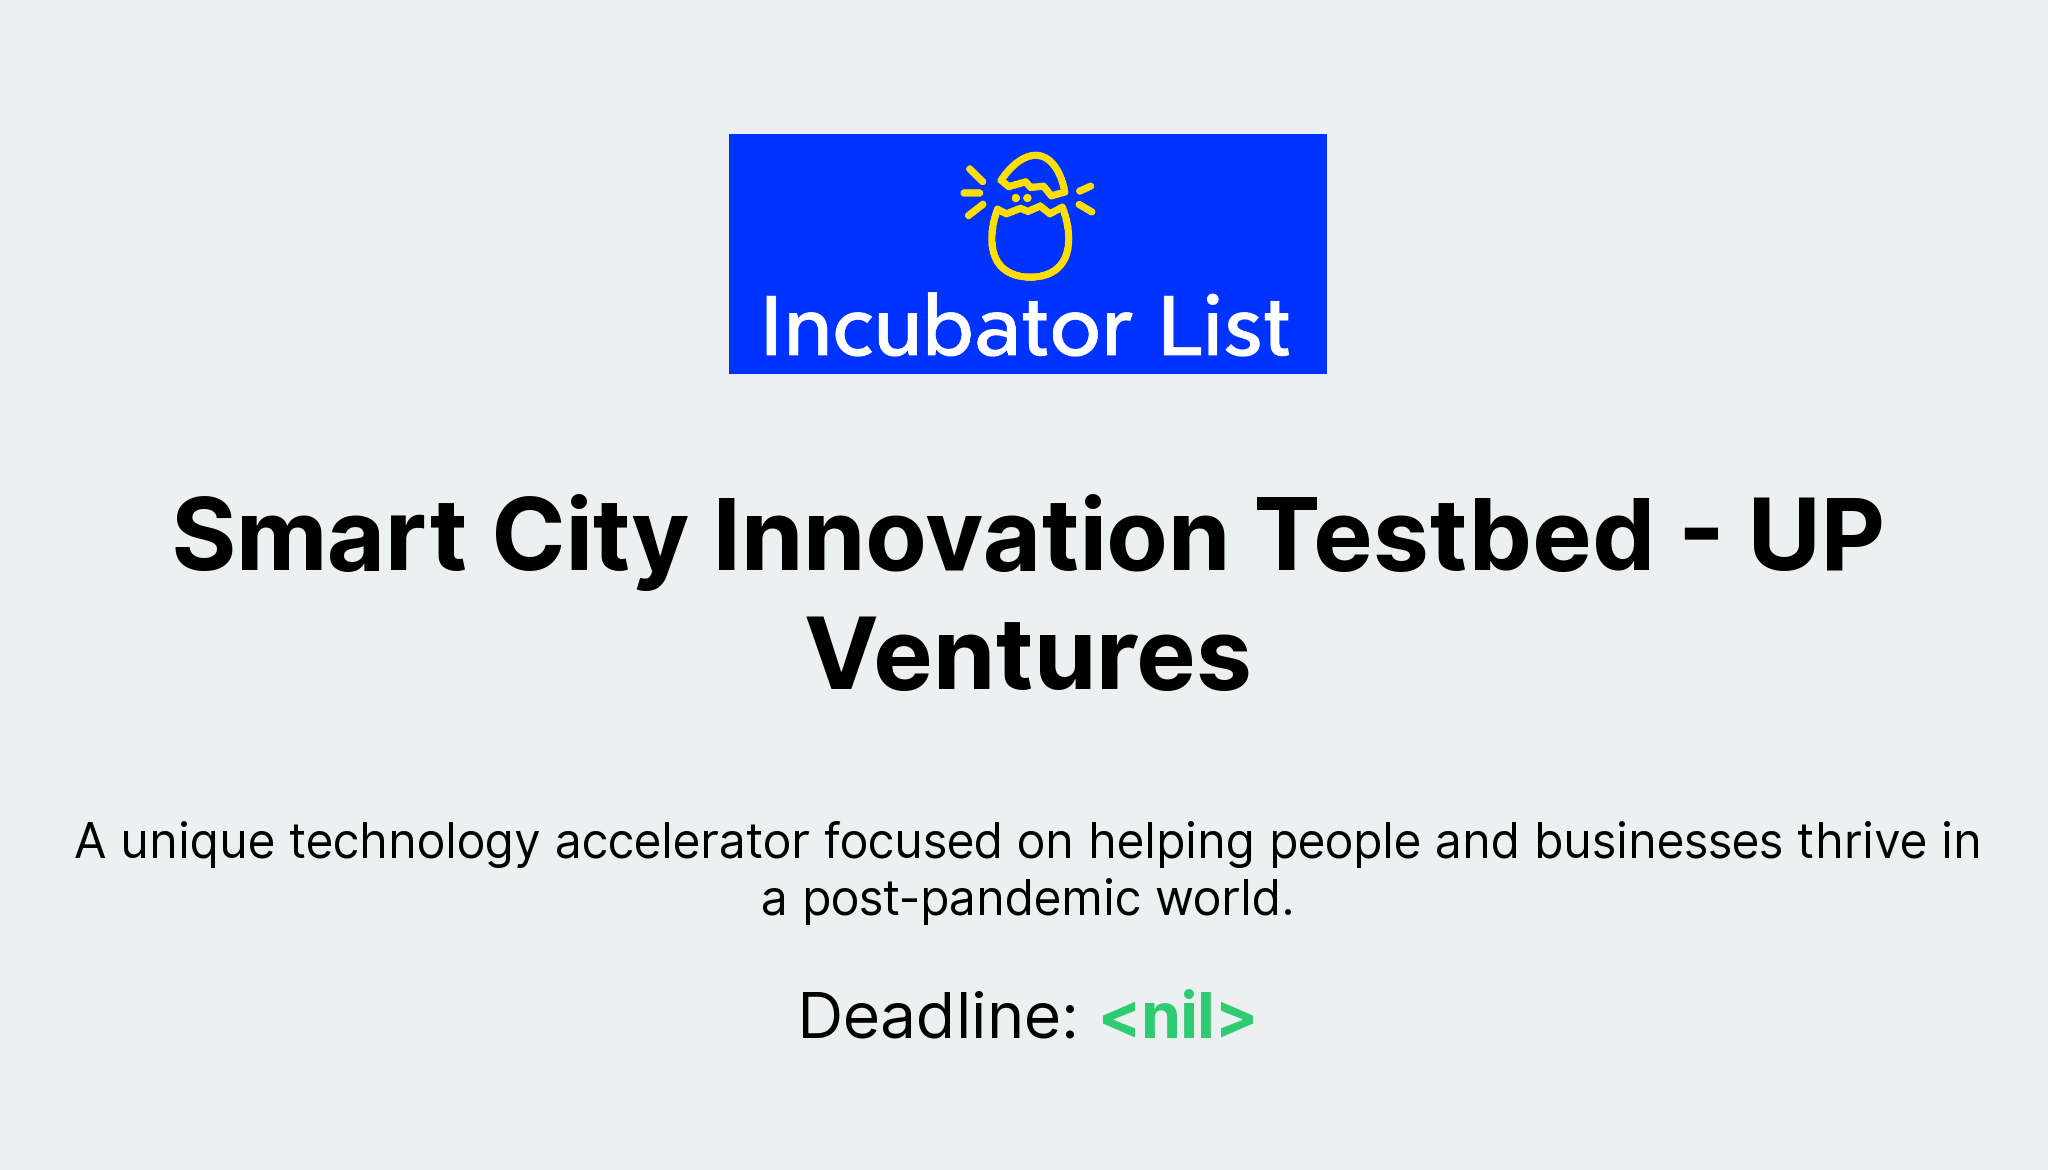 Doctor call Advanced Smart City Innovation Testbed - UP Ventures - Key Information